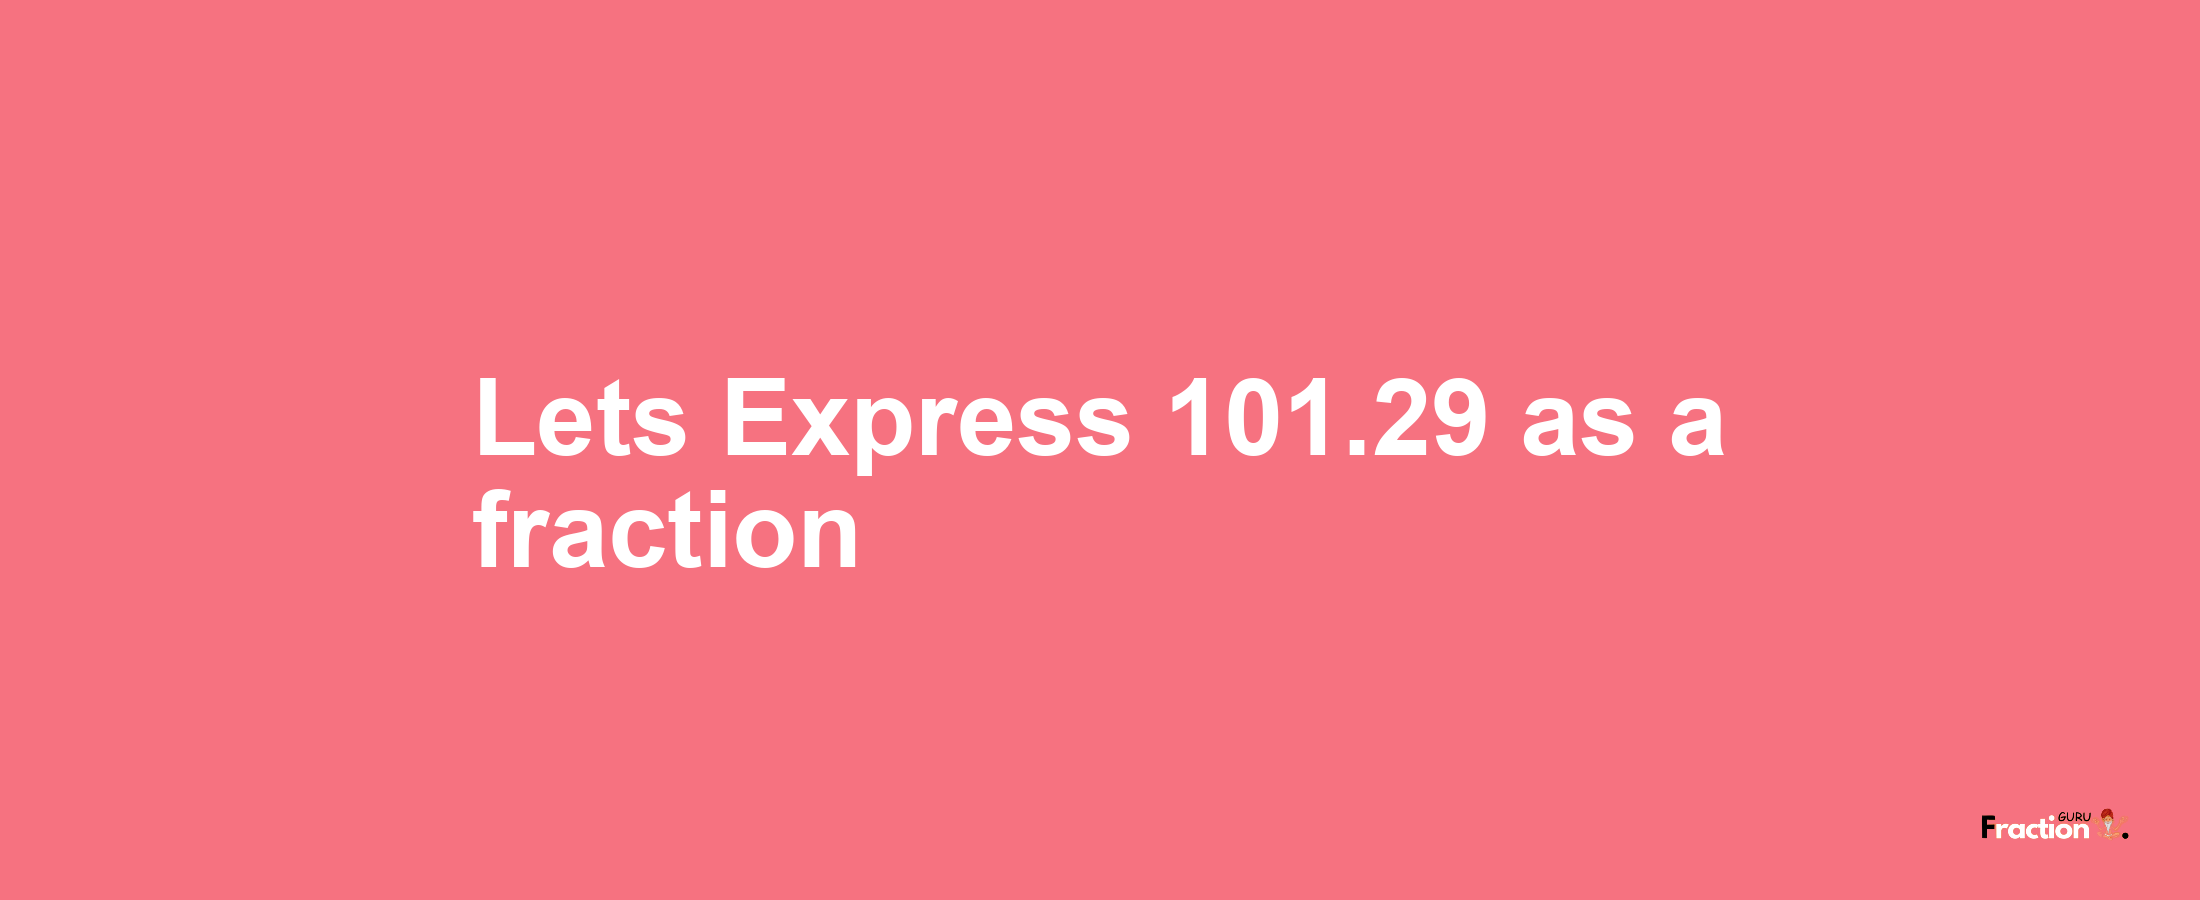 Lets Express 101.29 as afraction